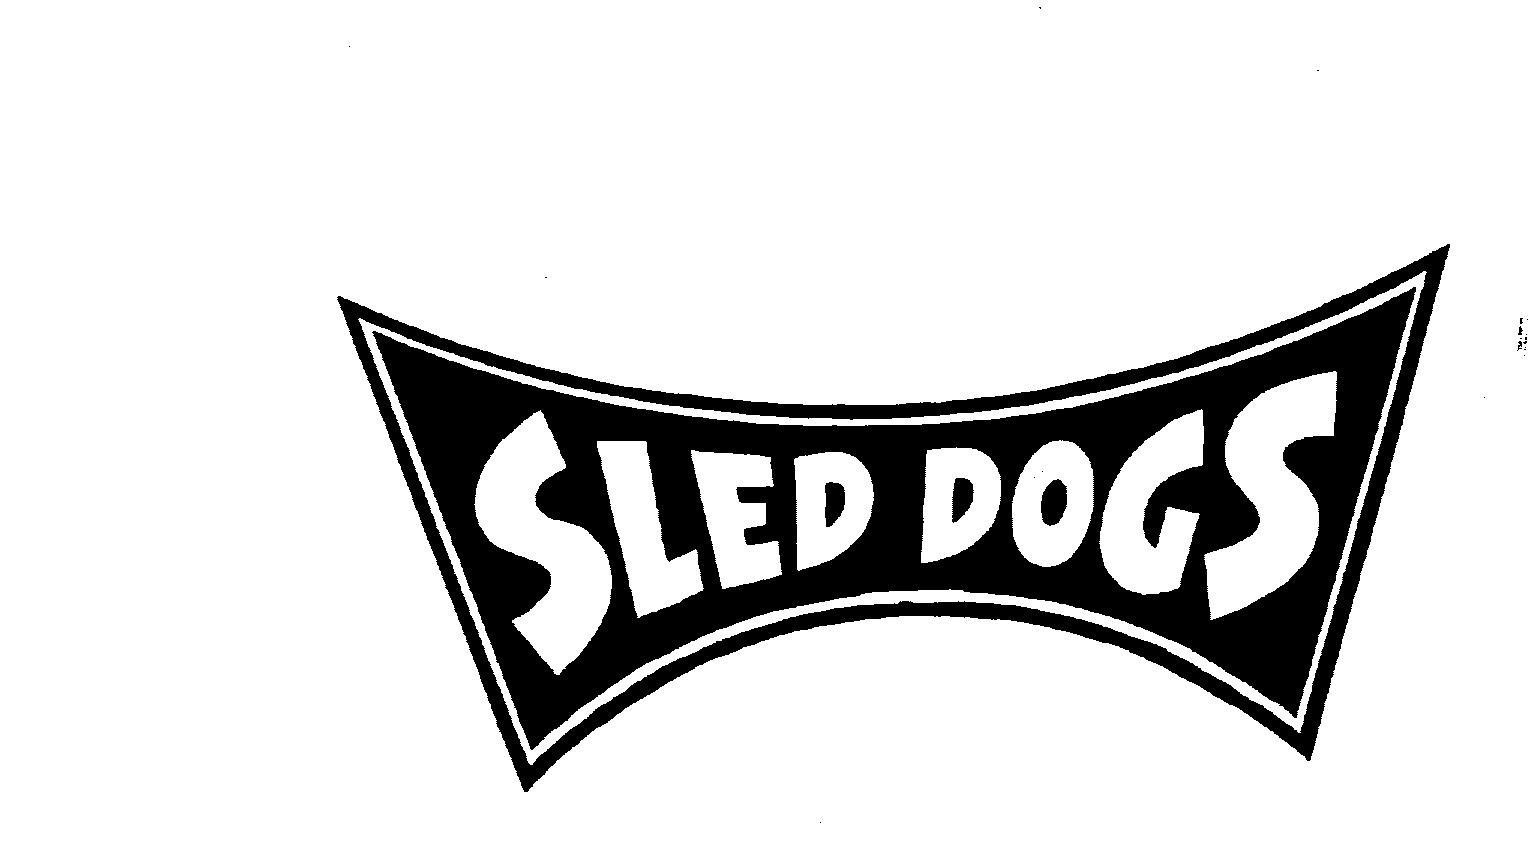 SLED DOGS